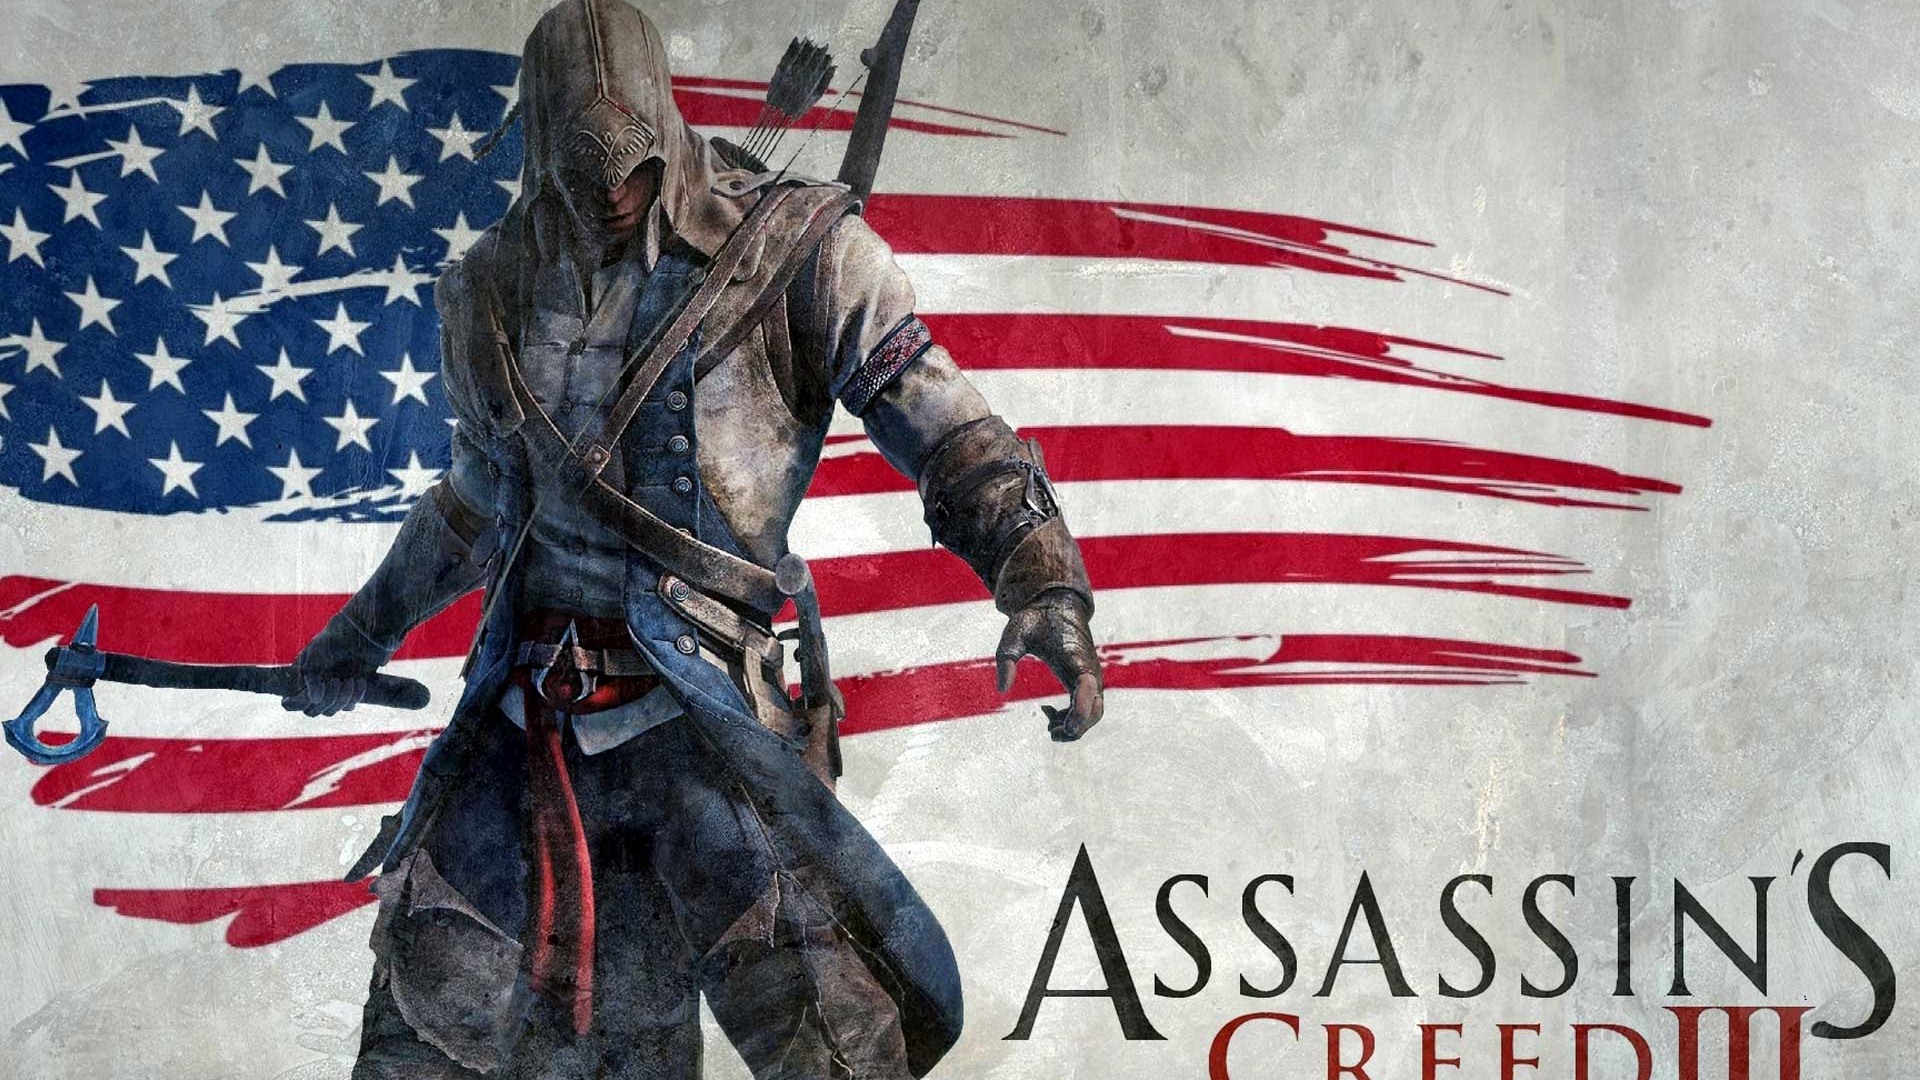 Assassin's Creed 3 HD wallpapers #12 - 1920x1080